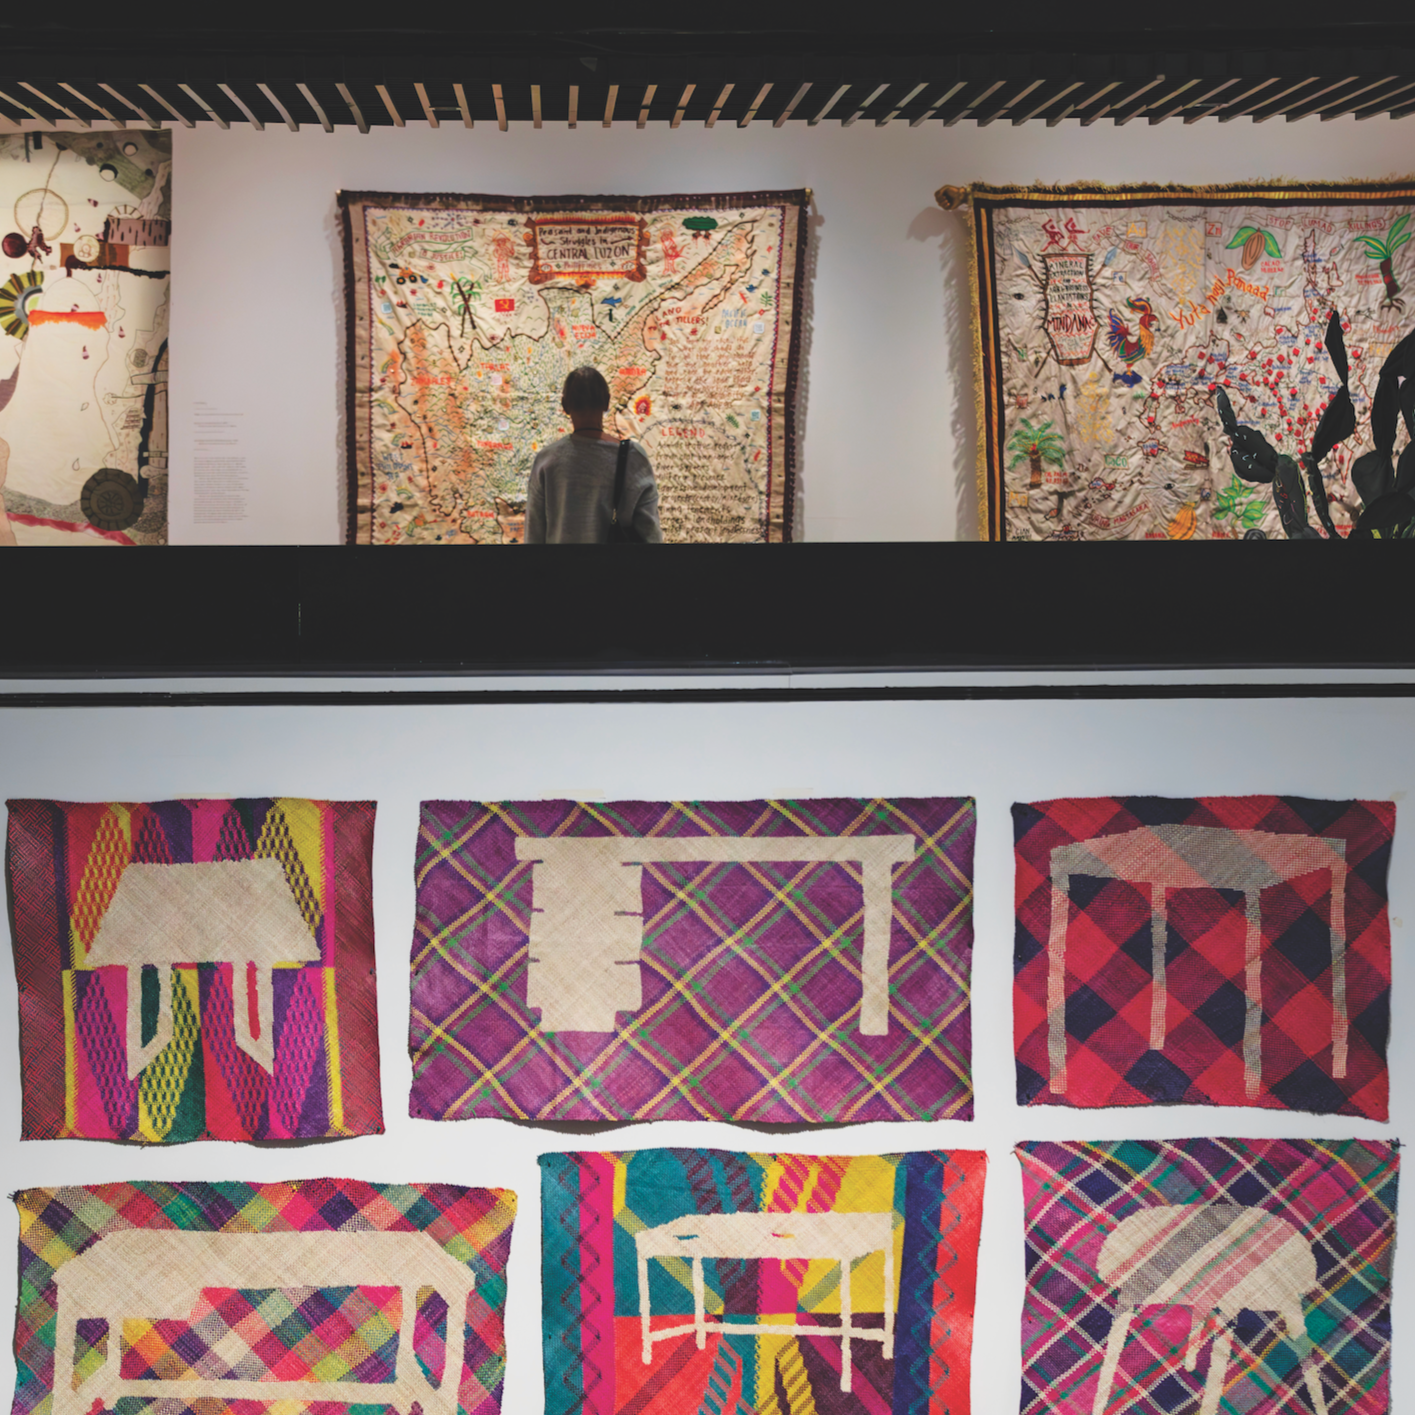 UNRAVEL: THE POWER AND POLITICS OF TEXTILES IN ART